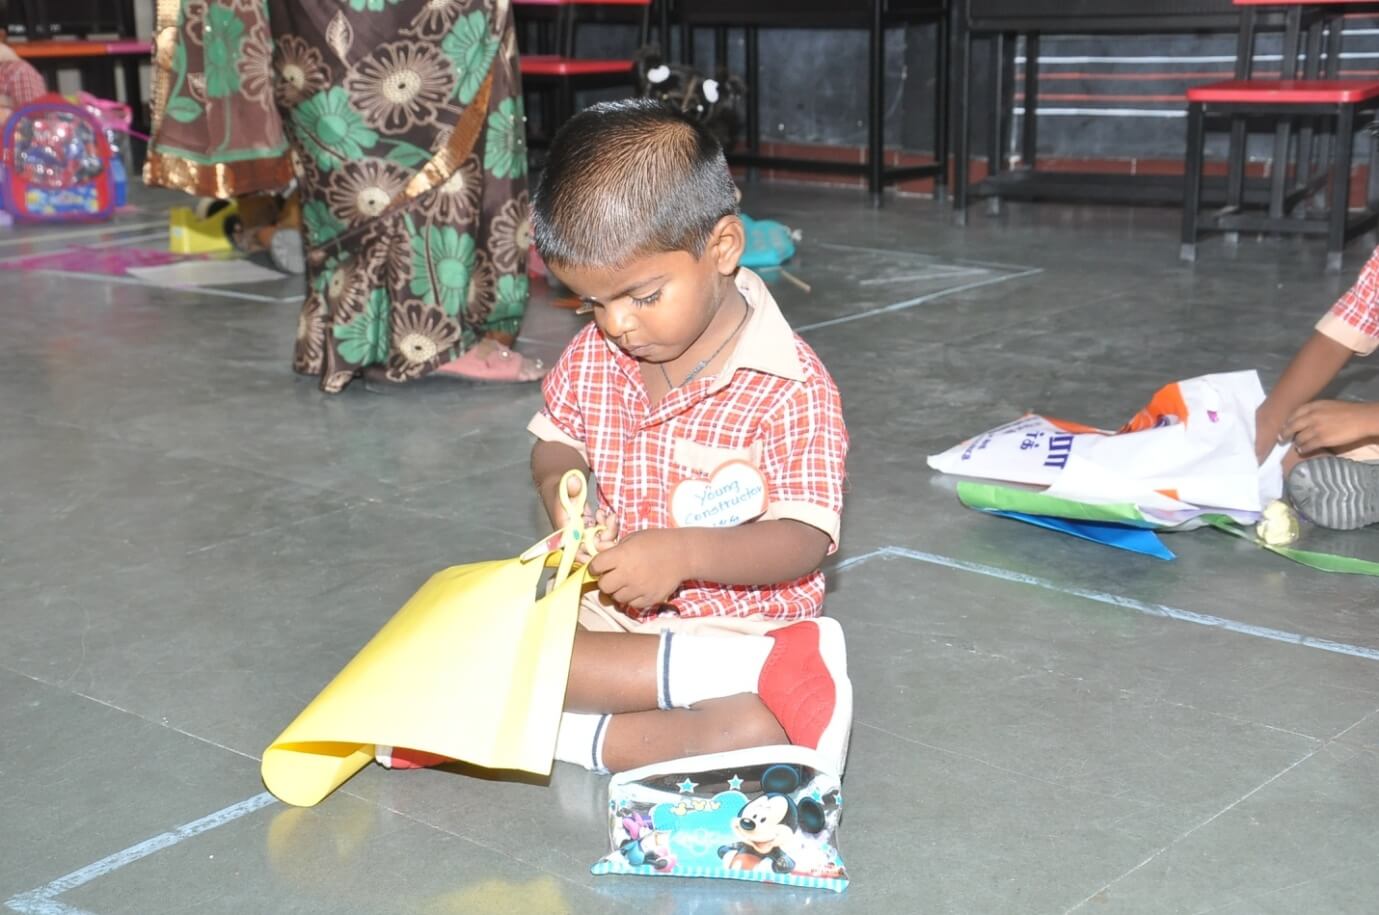 Here is our young constructor in the  kite making process.